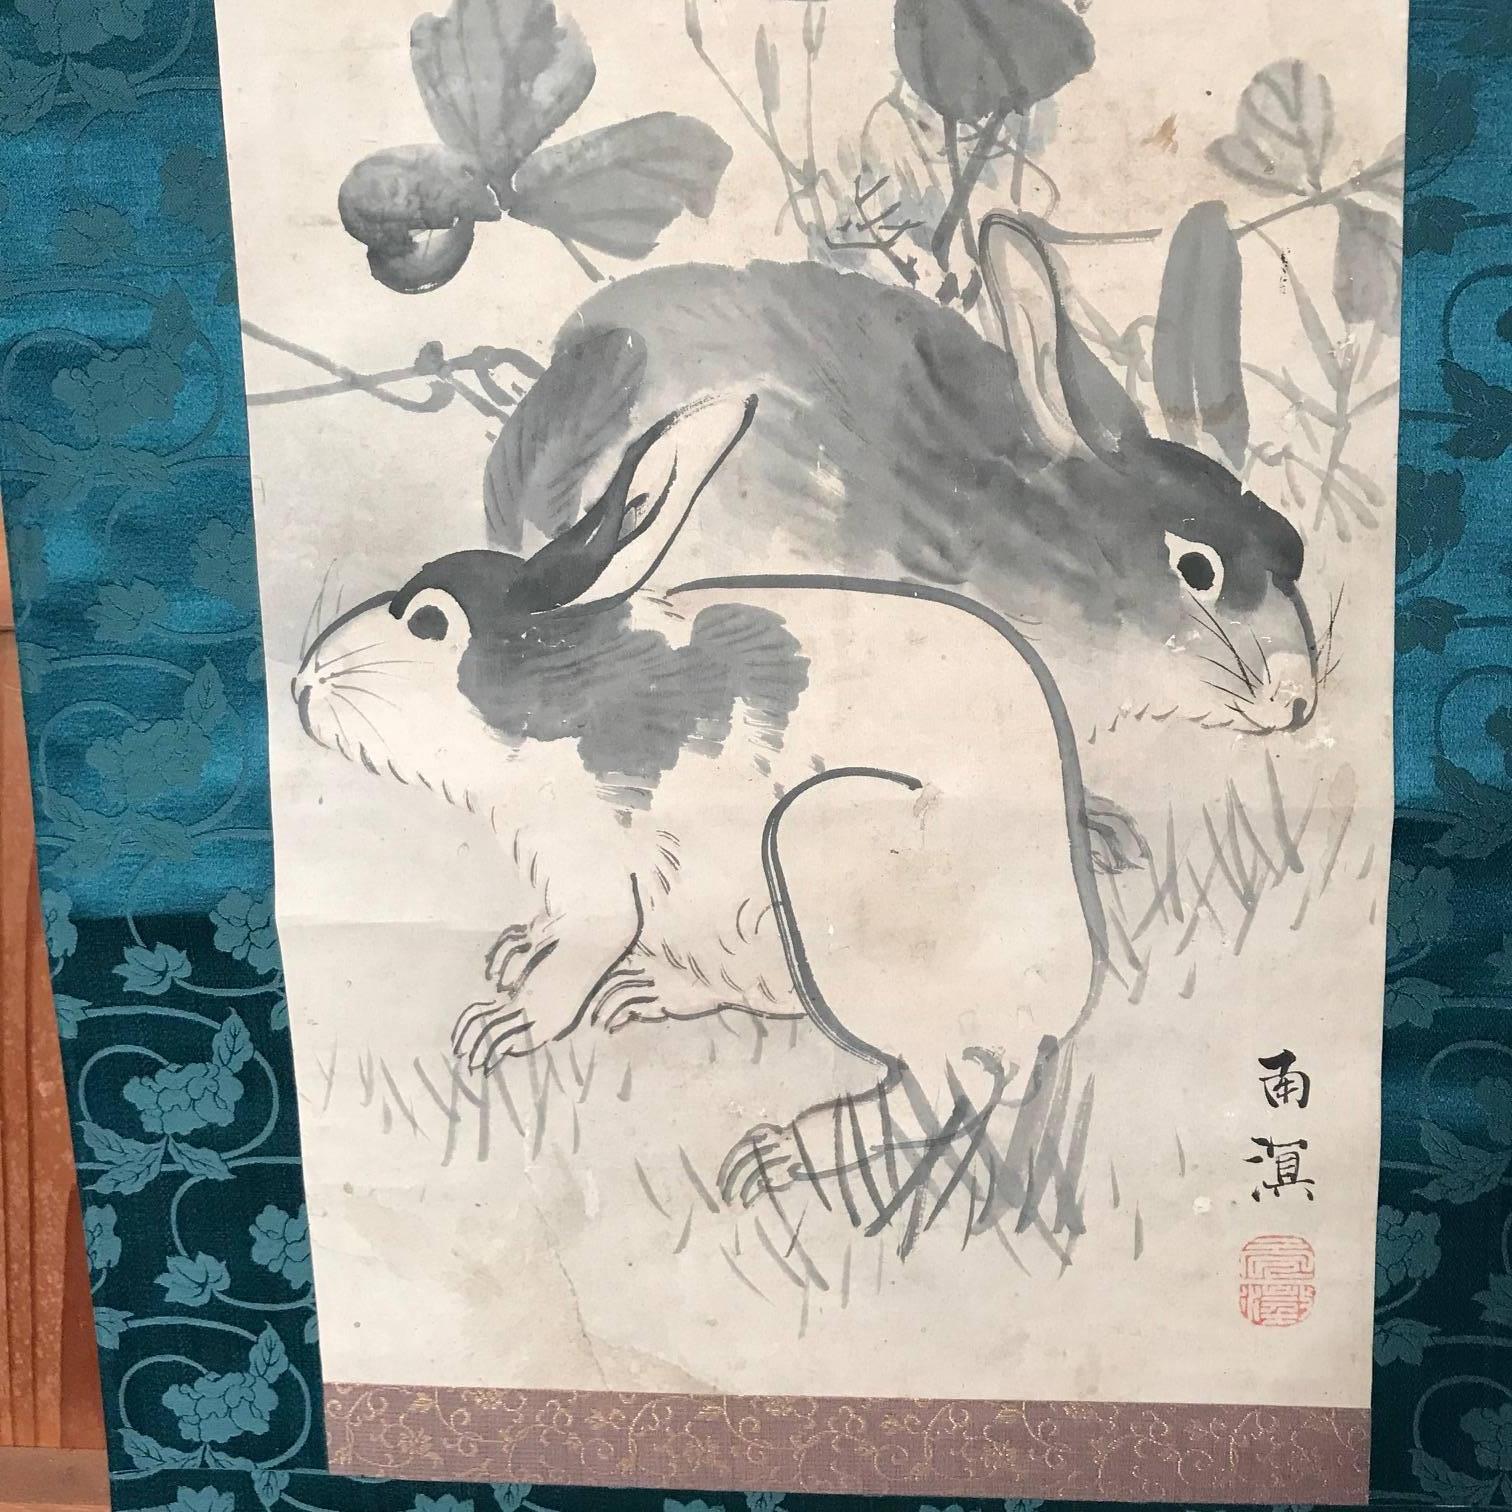 Japan, an attractive old hand painting on paper scroll of a pair of playful rabbits, signed, Showa period, (1926-1940).

Dimensions: Scroll 15 inches wide and 71 inches length.

Hard to find subject matter, this handsome painting is skillfully